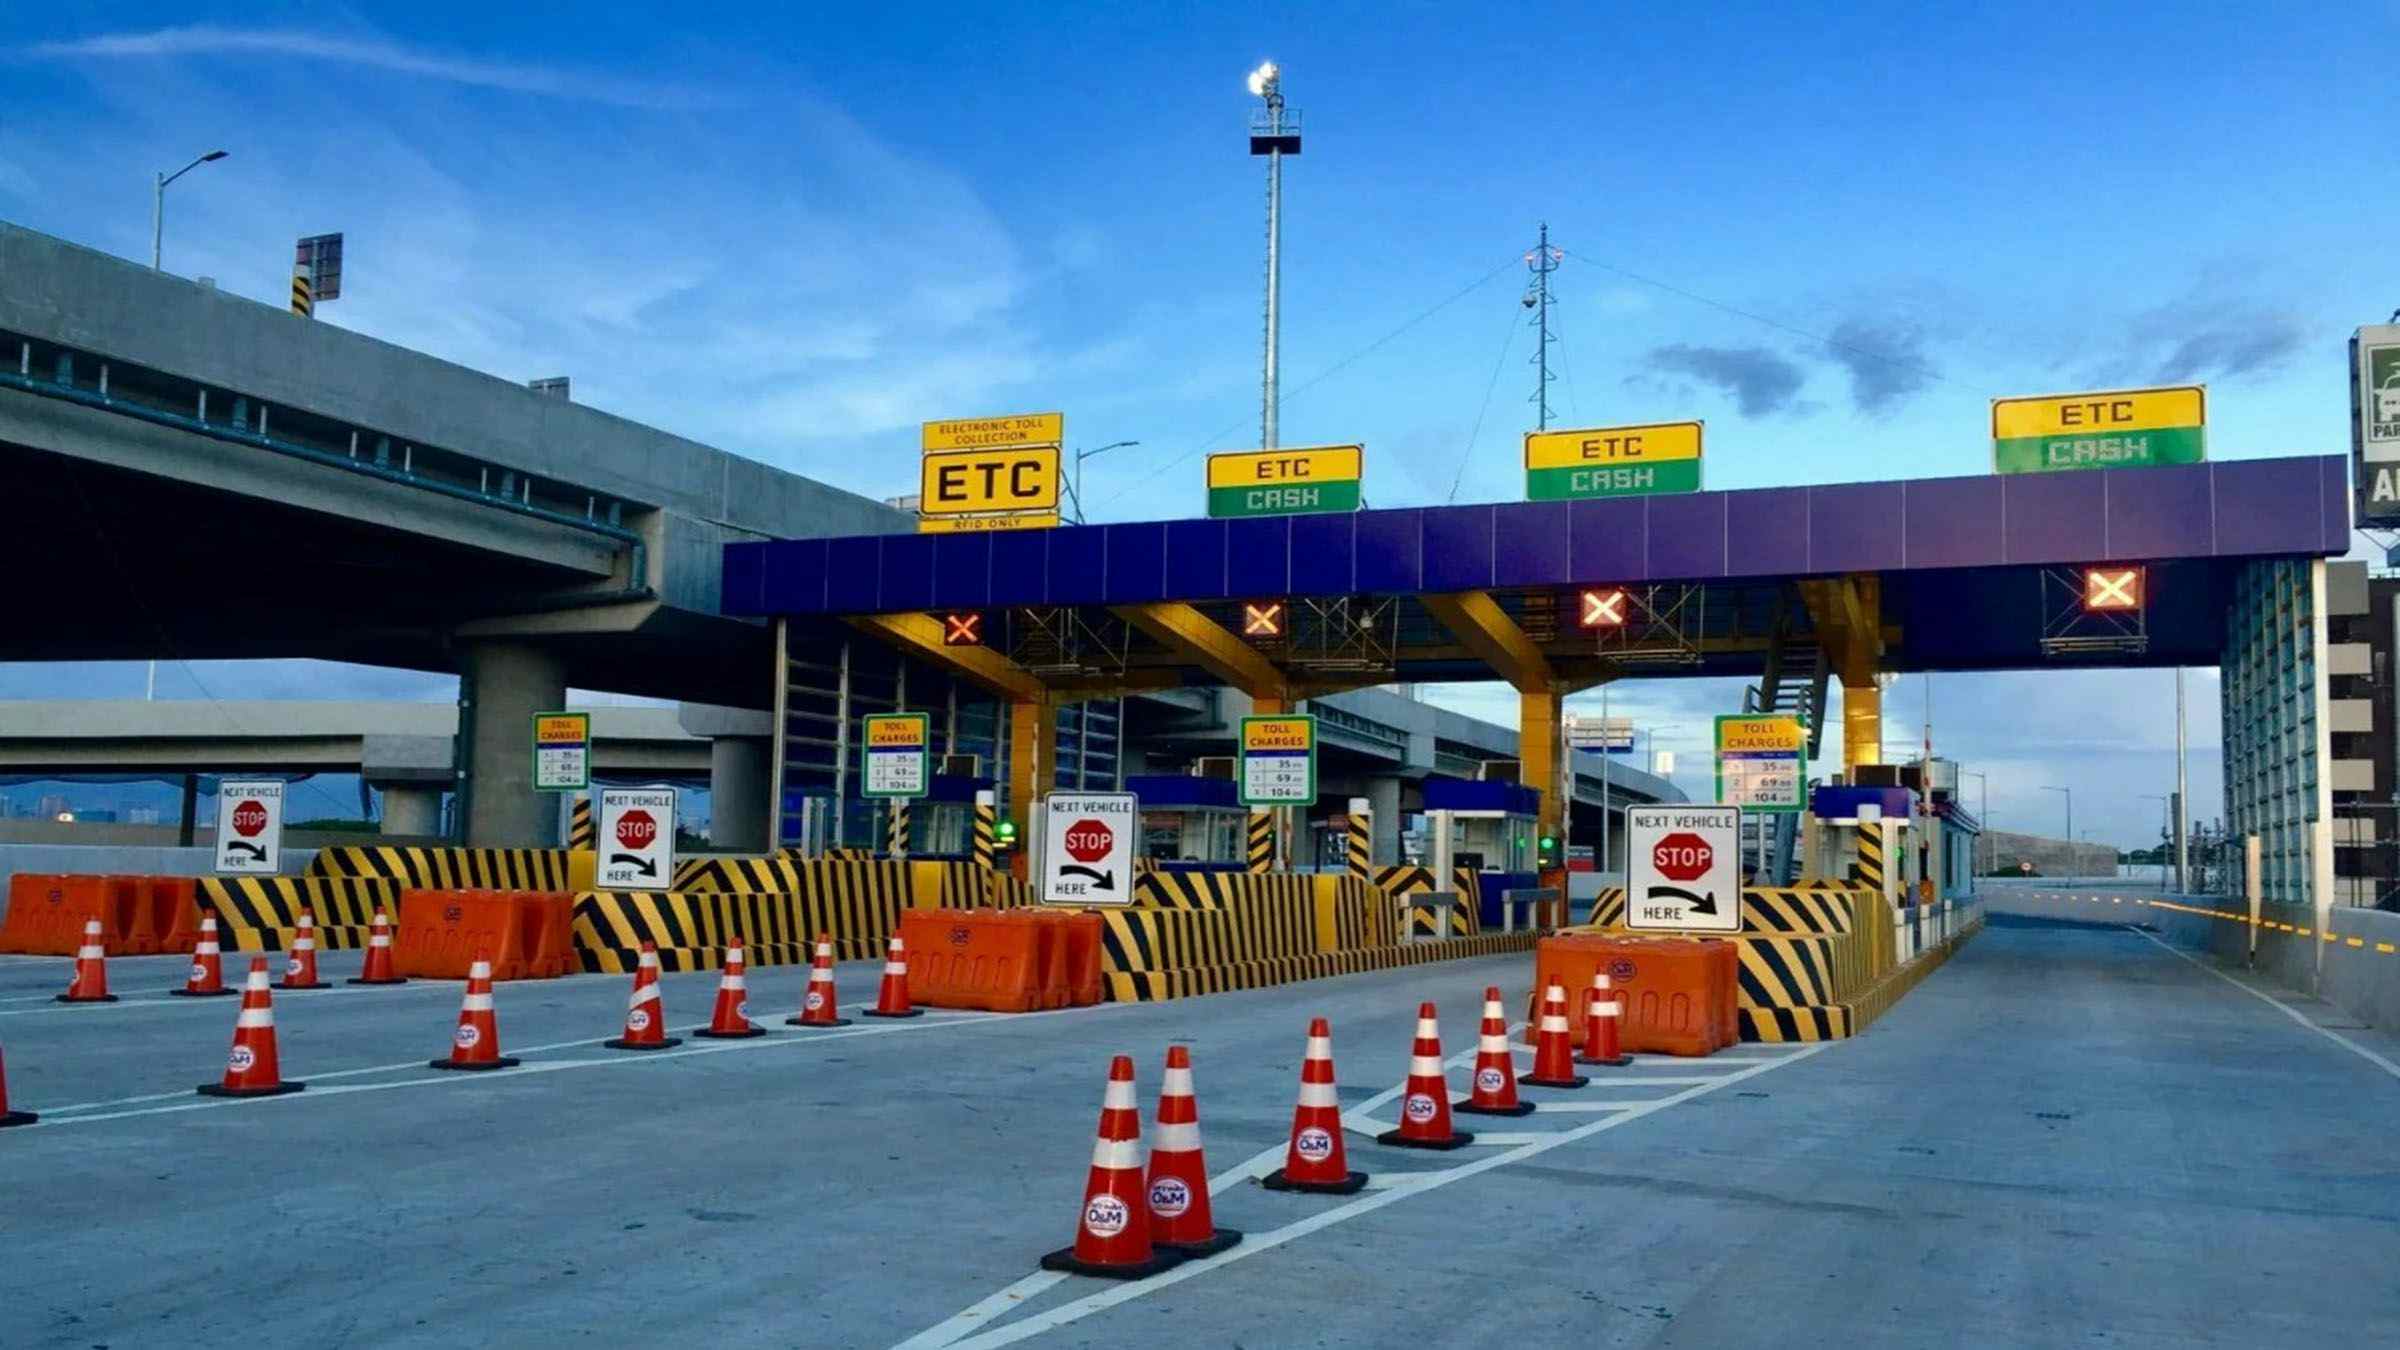 SMC waives toll fees for motorists affected by RFID glitch